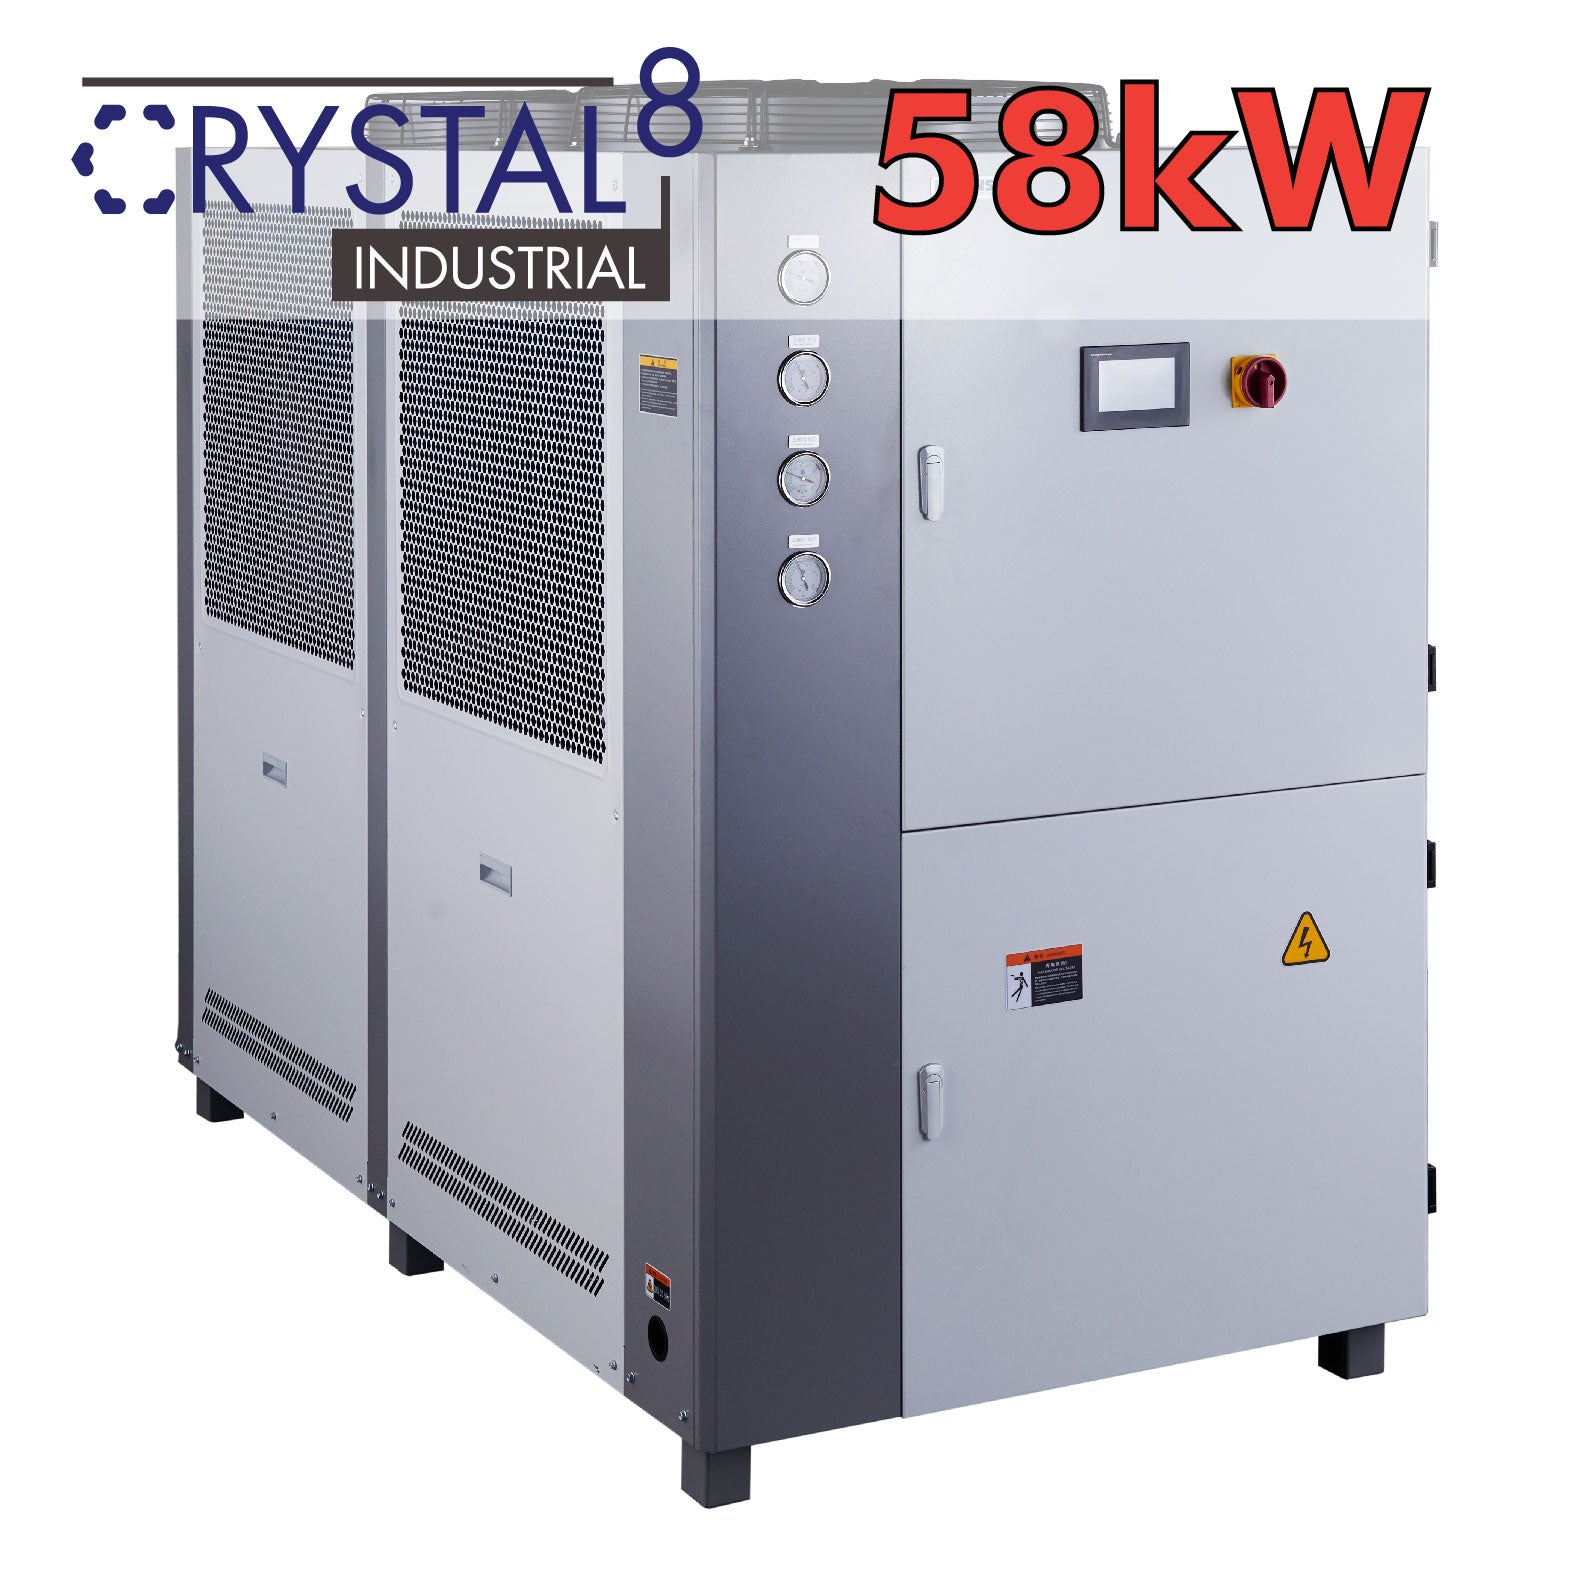 Compact and powerful 58kW Glycol Chiller.